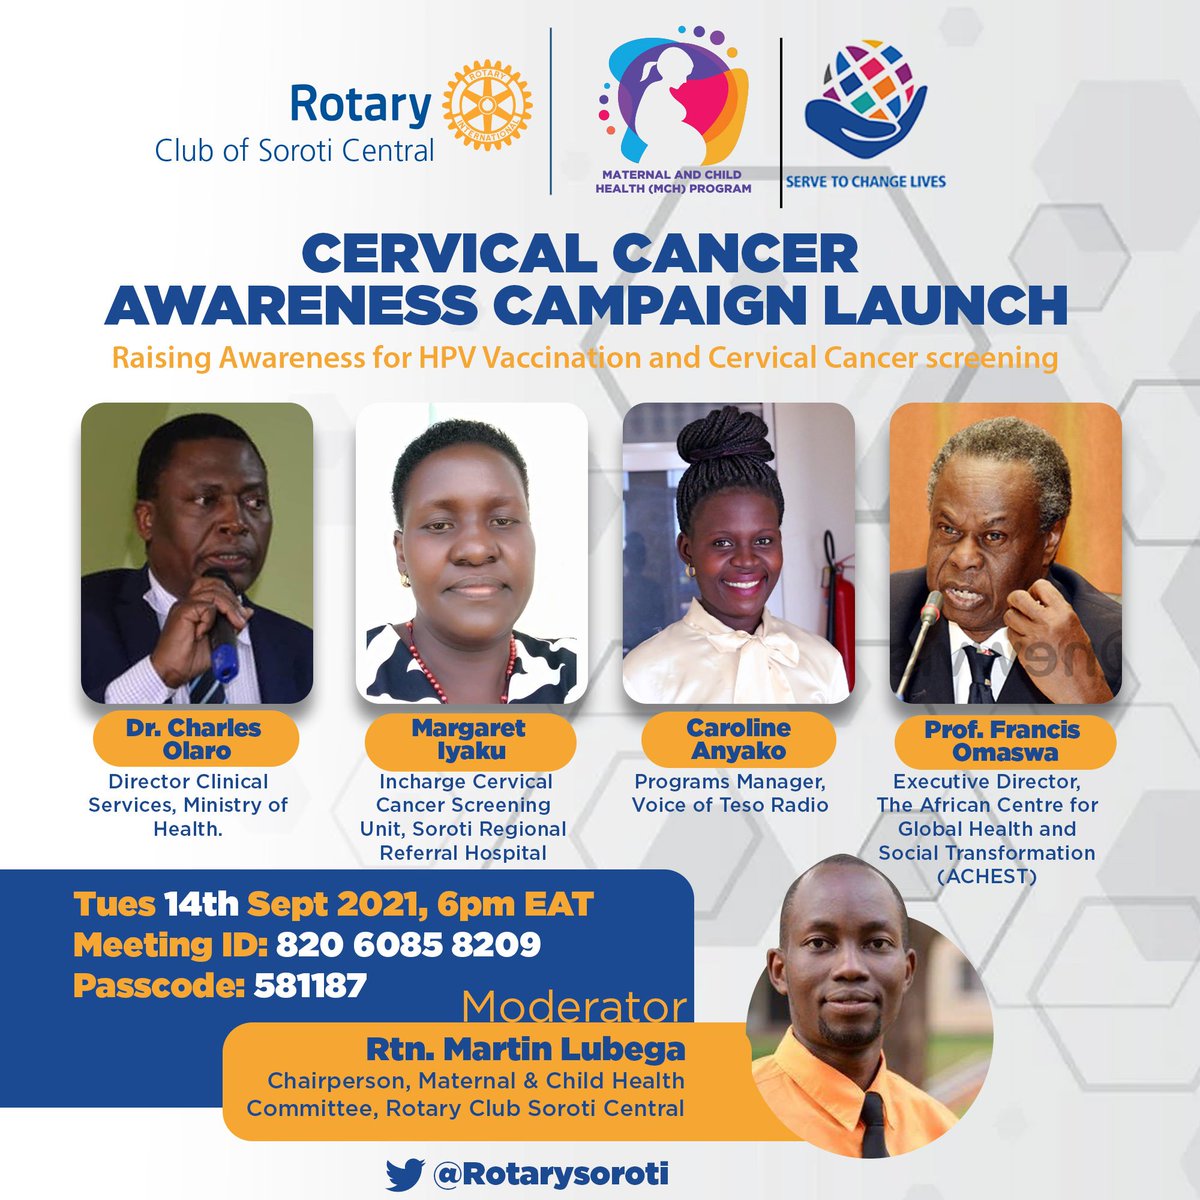 You are all invited to join us as we launch this Cervical Cancer Awareness Campaign as part of the @rotaryd9213 MCH program. 
#HPVvaccination
#CervicalCancerScreening. 
Don't miss @omaswa @olaro_charles @DepaulLubega, Carol from @voice_of_teso & Sr. Iyaku from @SorotiHospital